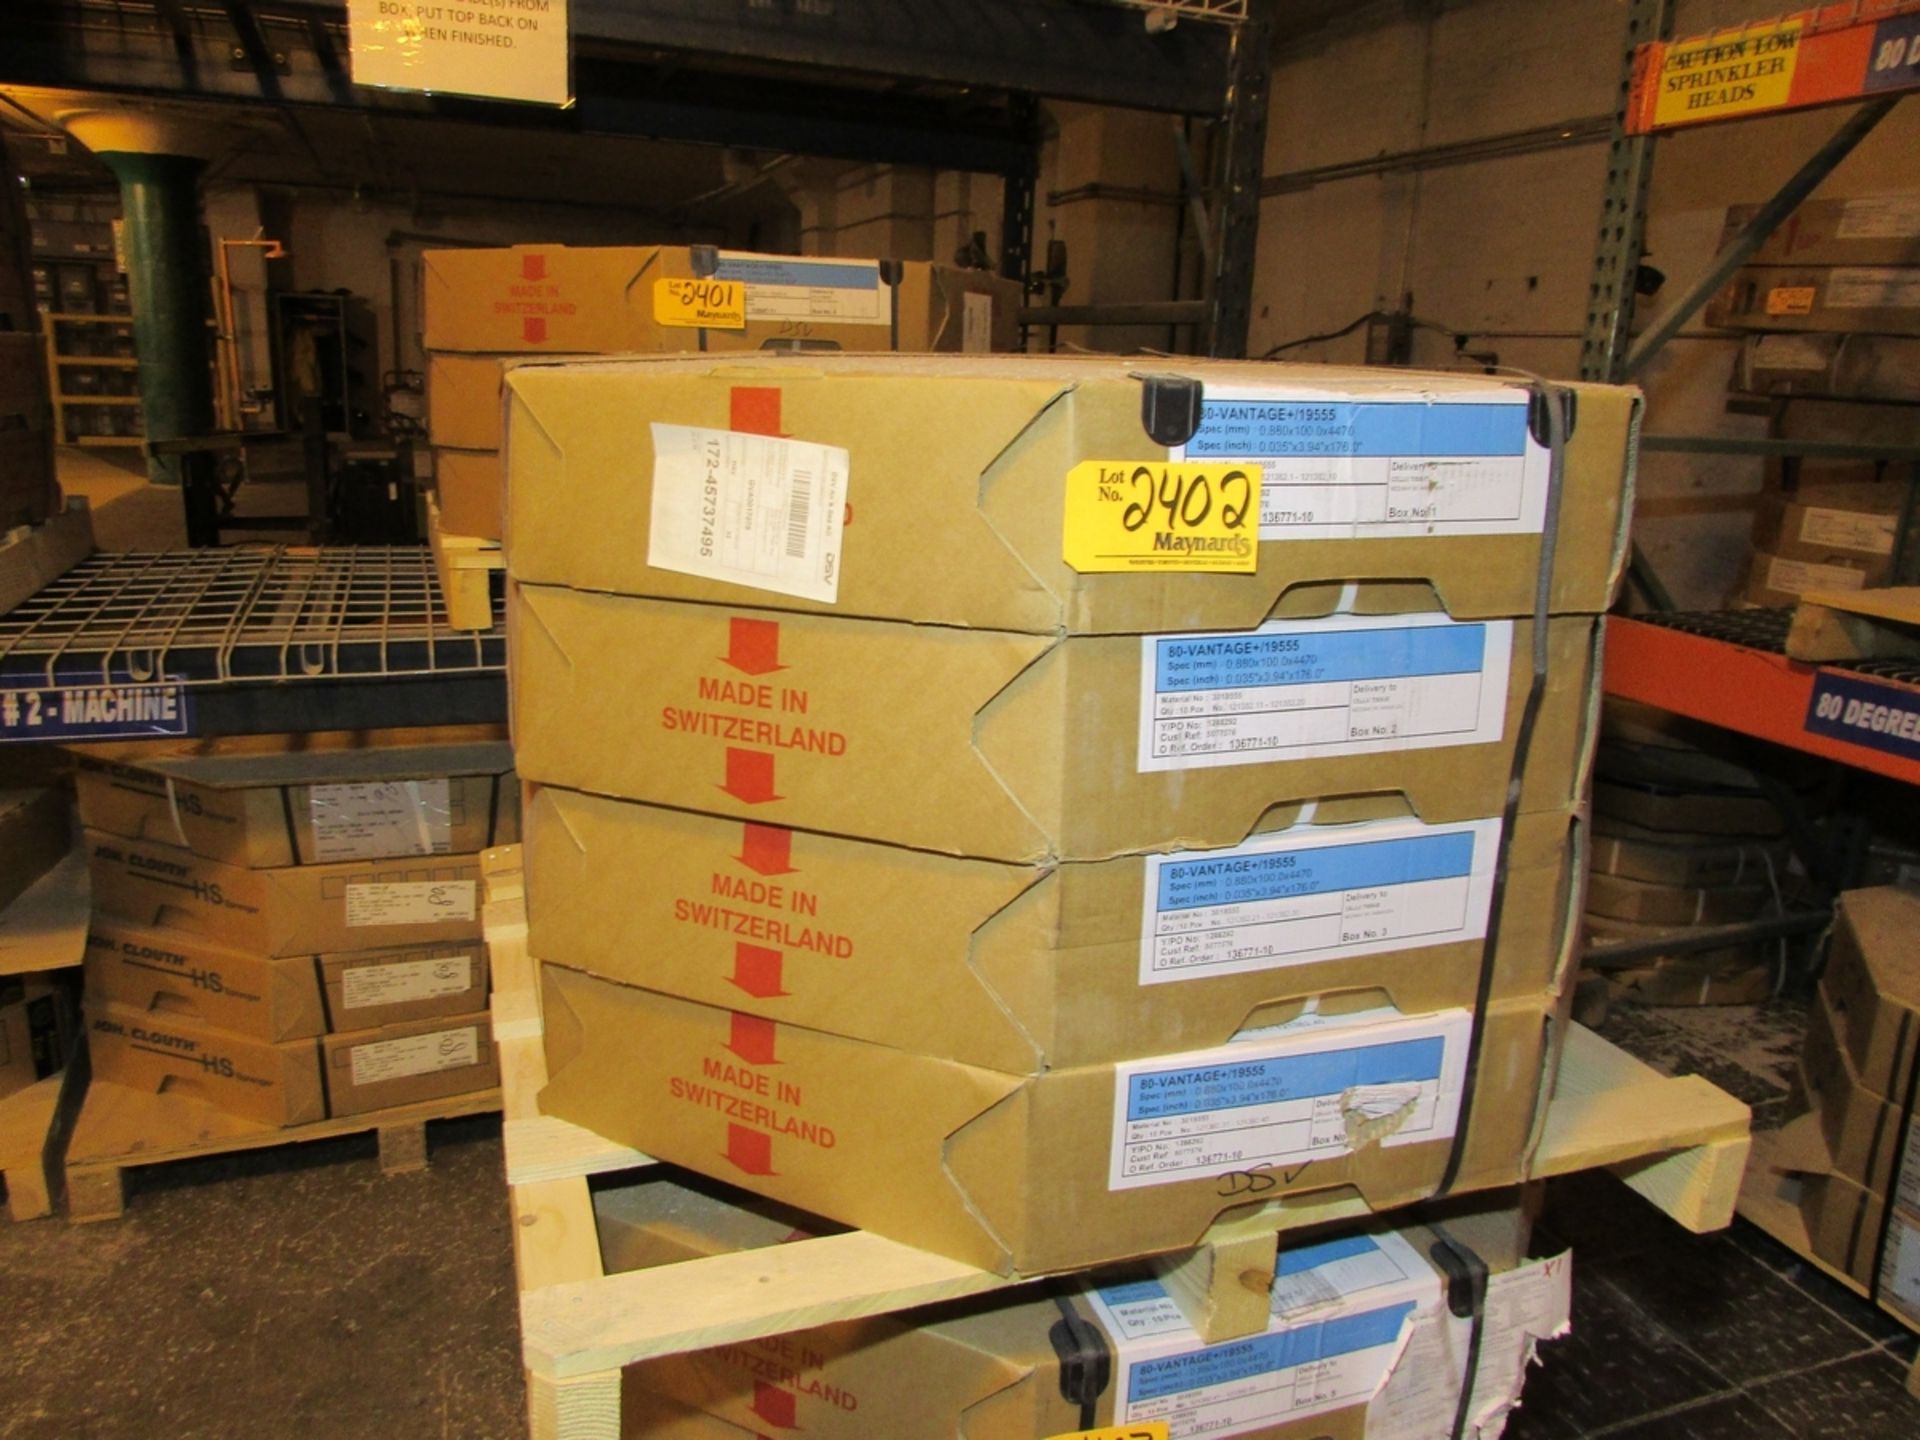 Voith BTG 80-Vantage+/19555 Boxes of 0.035" x 3.94" x 176" Creping Blades